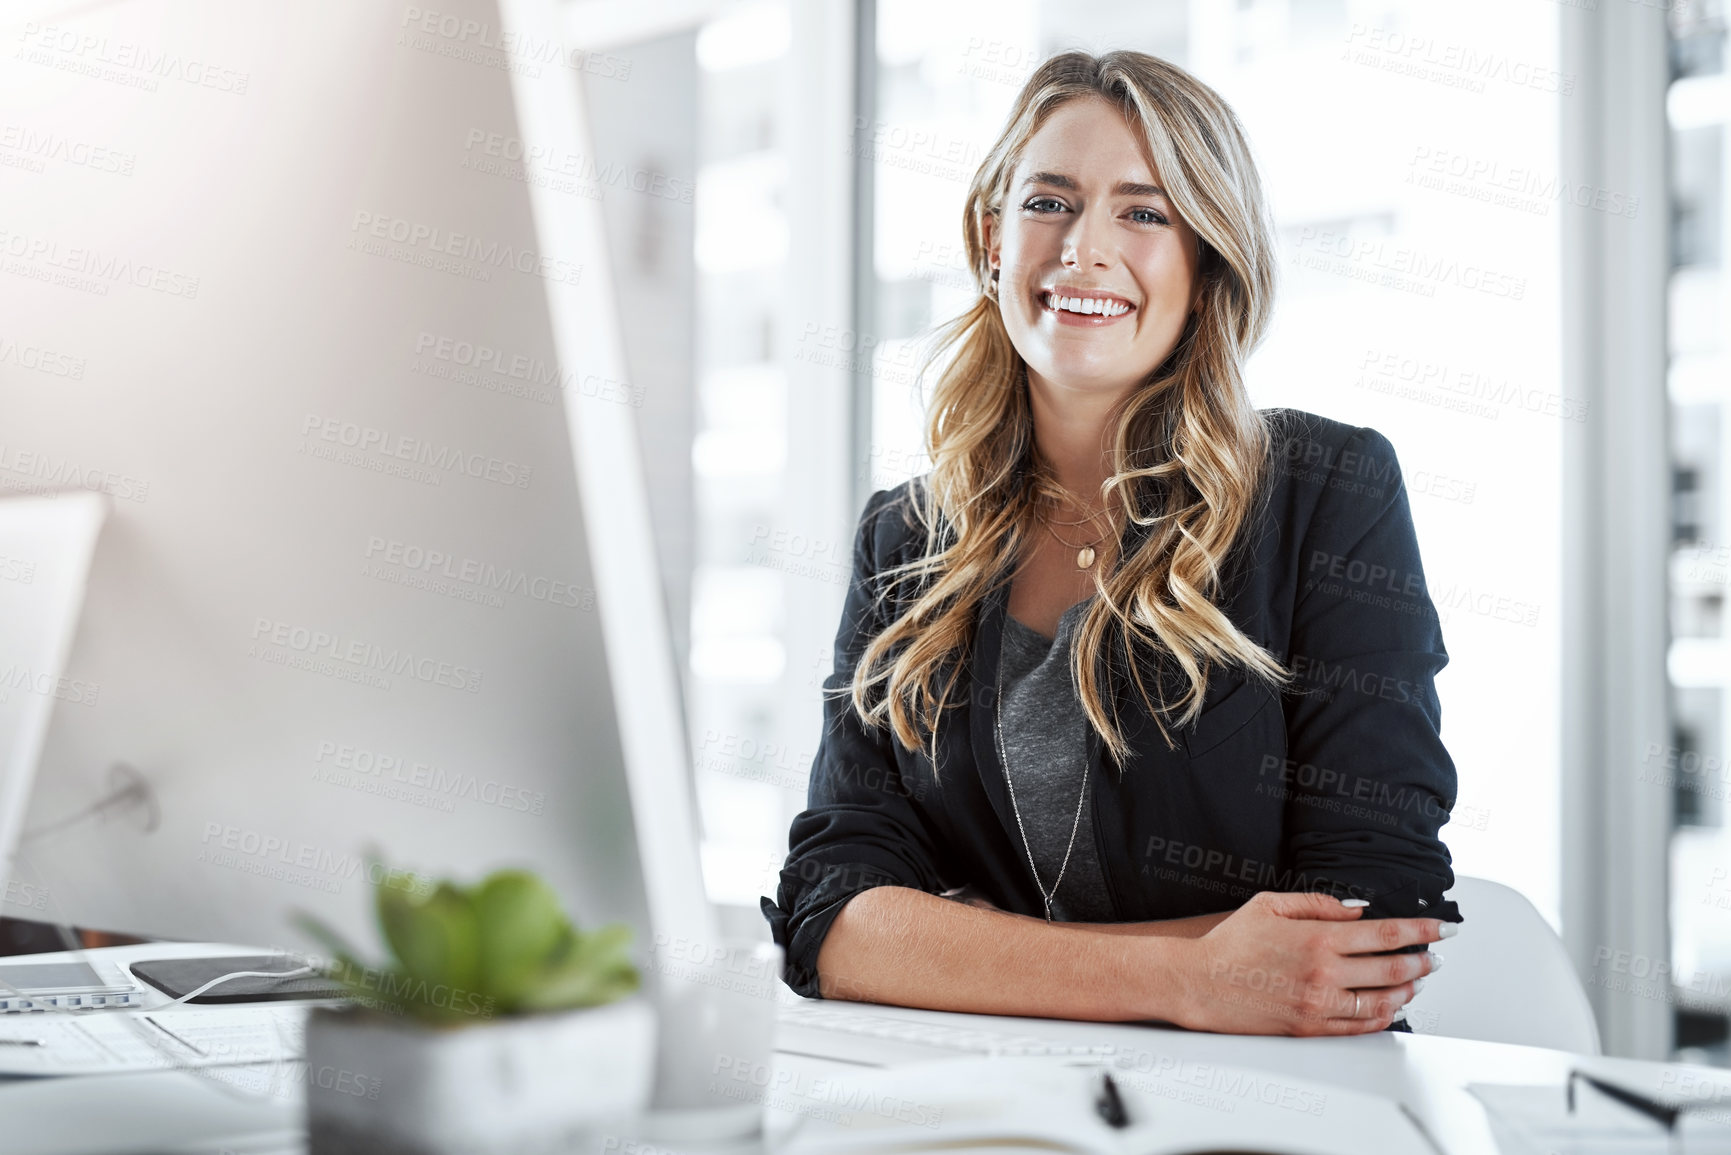 Buy stock photo Portrait of a young businesswoman working at her desk in a modern office